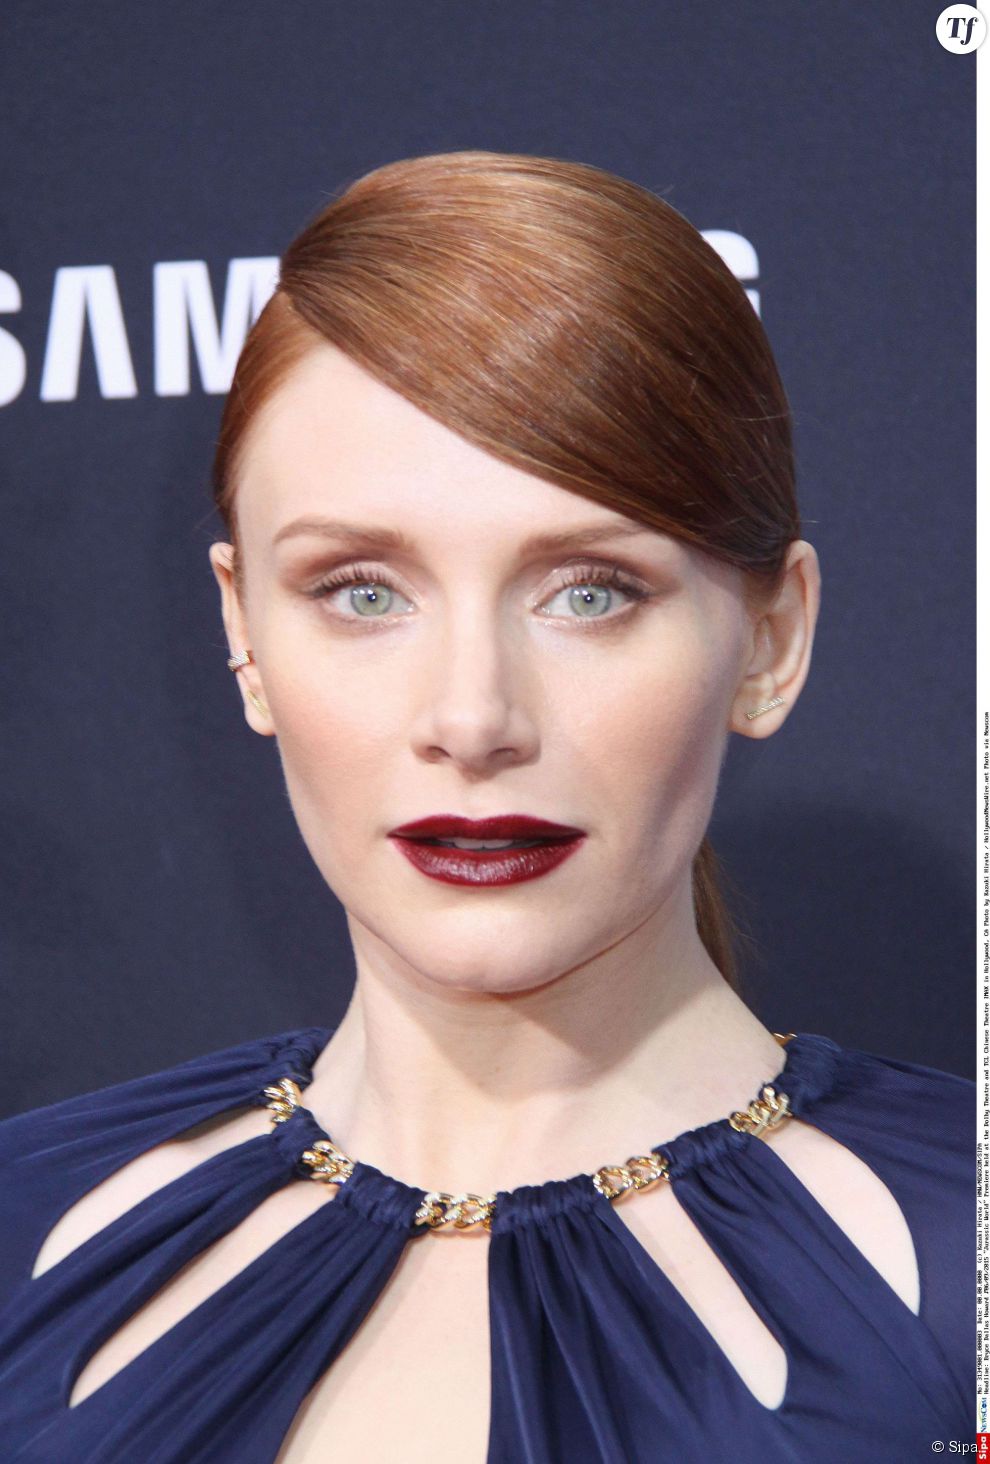  Bryce Dallas Howard    06/09/2015 &quot;Jurassic World&quot; Premiere held at the Dolby Theatre and TCL Chinese Theatre IMAX in Hollywood, CA Photo by Kazuki Hirata / HollywoodNewsWire.net  